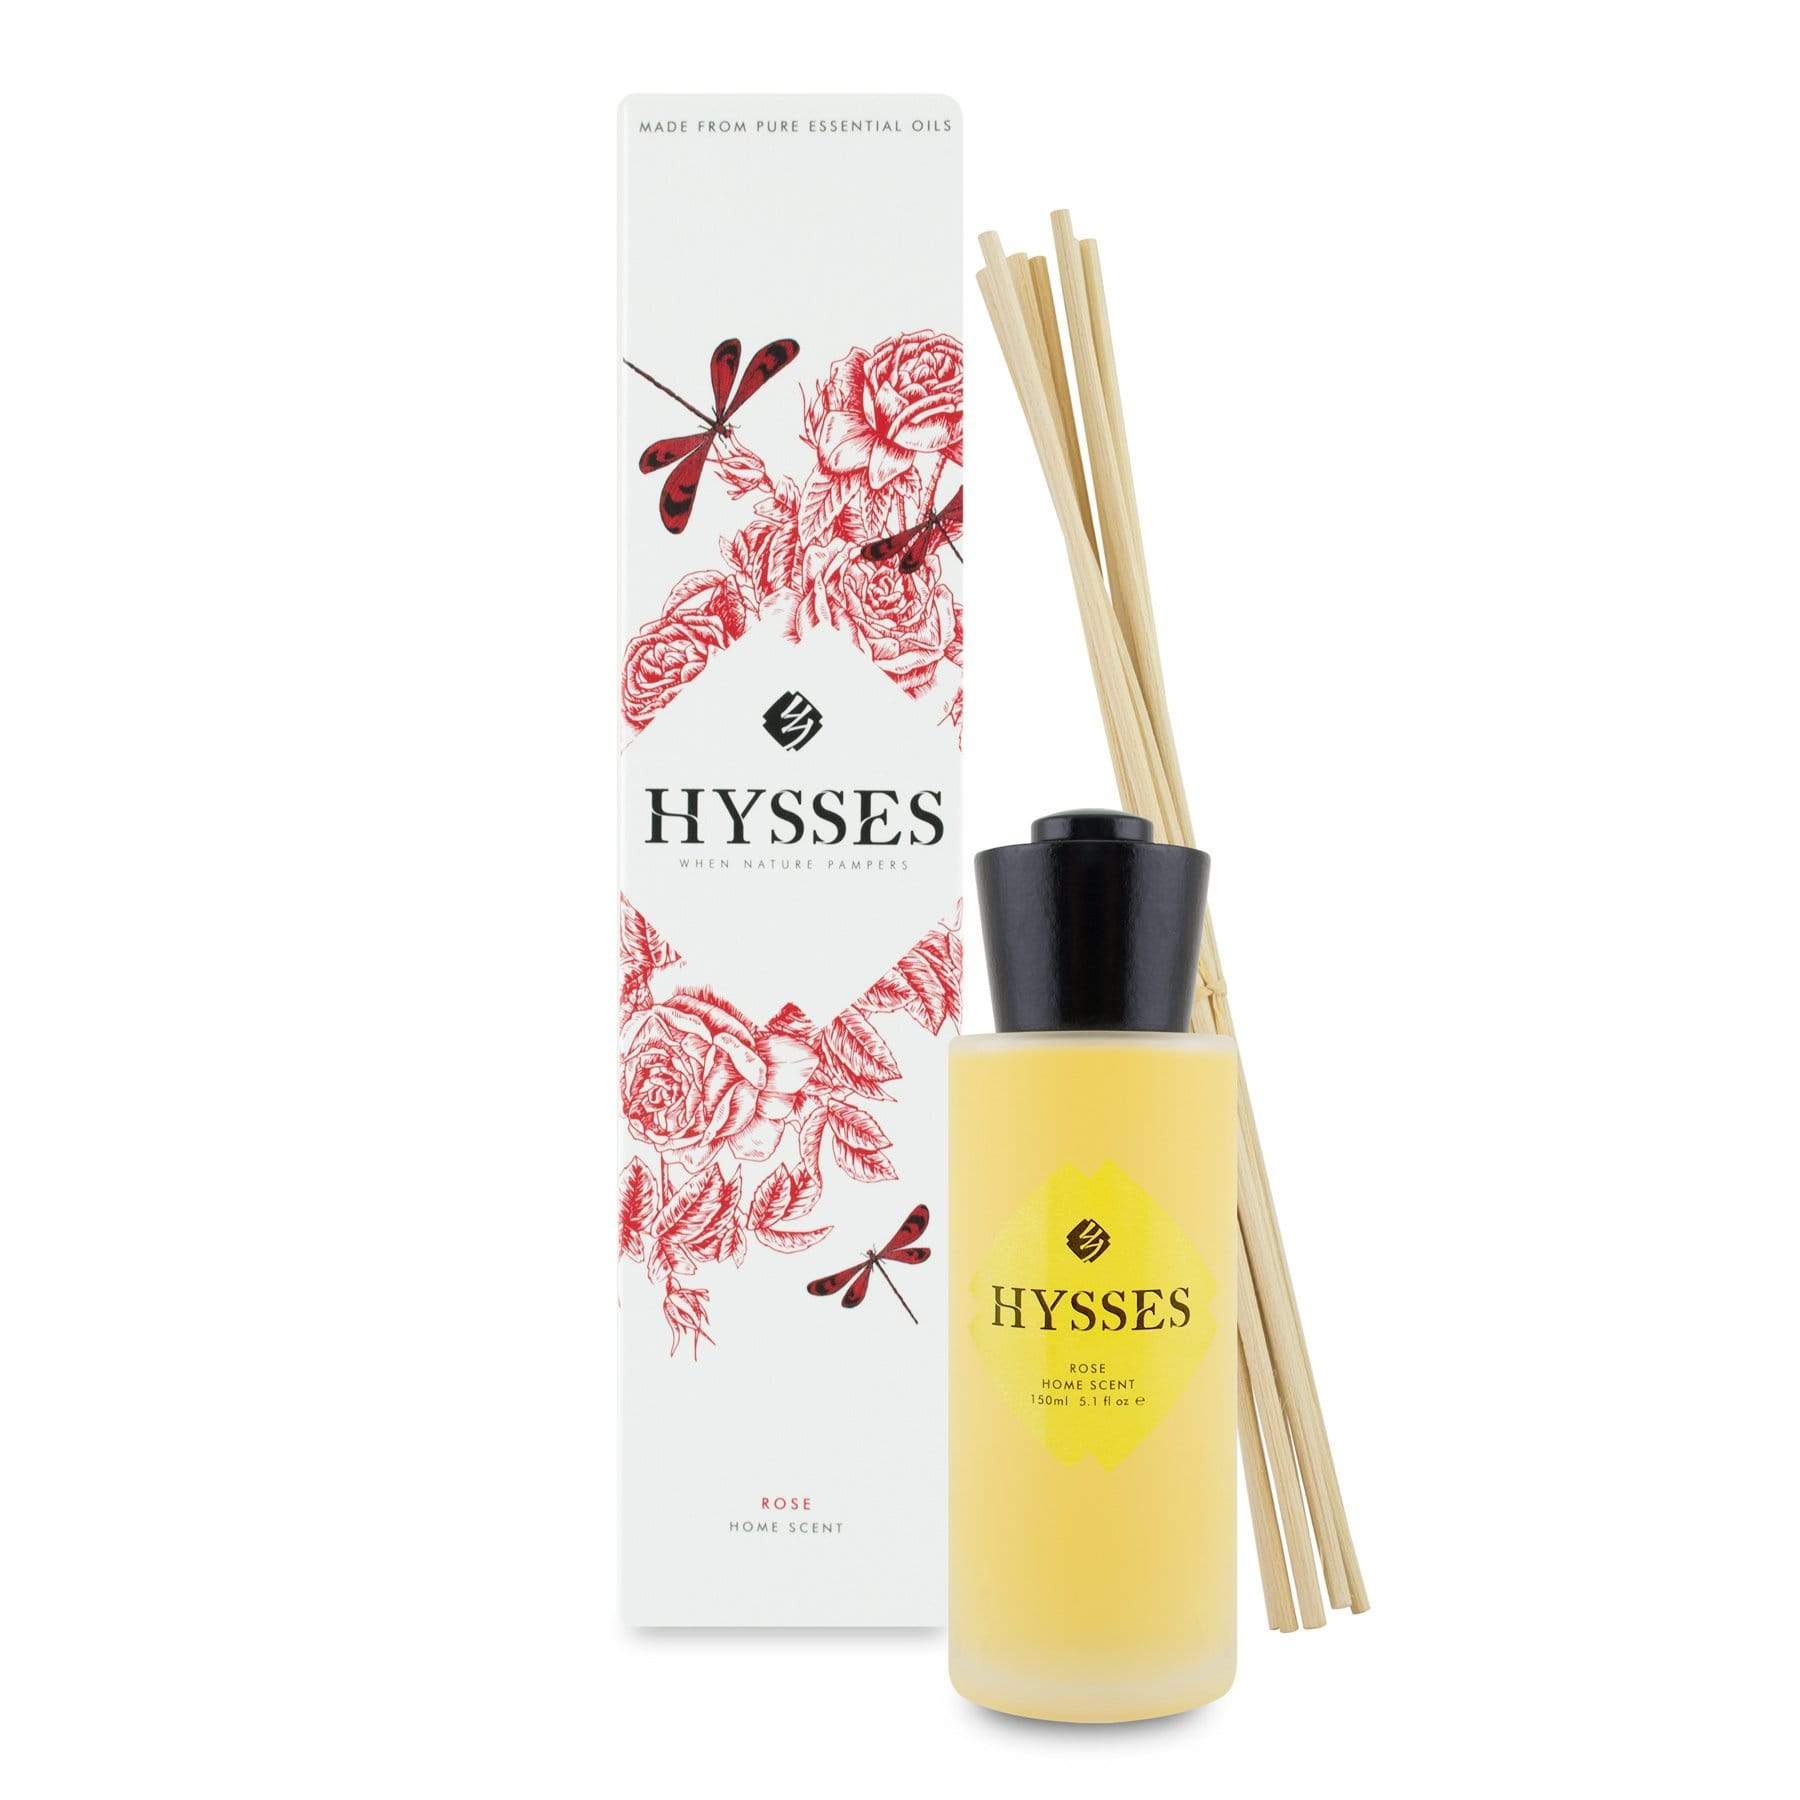 Hysses Home Scents 60ml Home Scent Reed Diffuser Rose Geranium